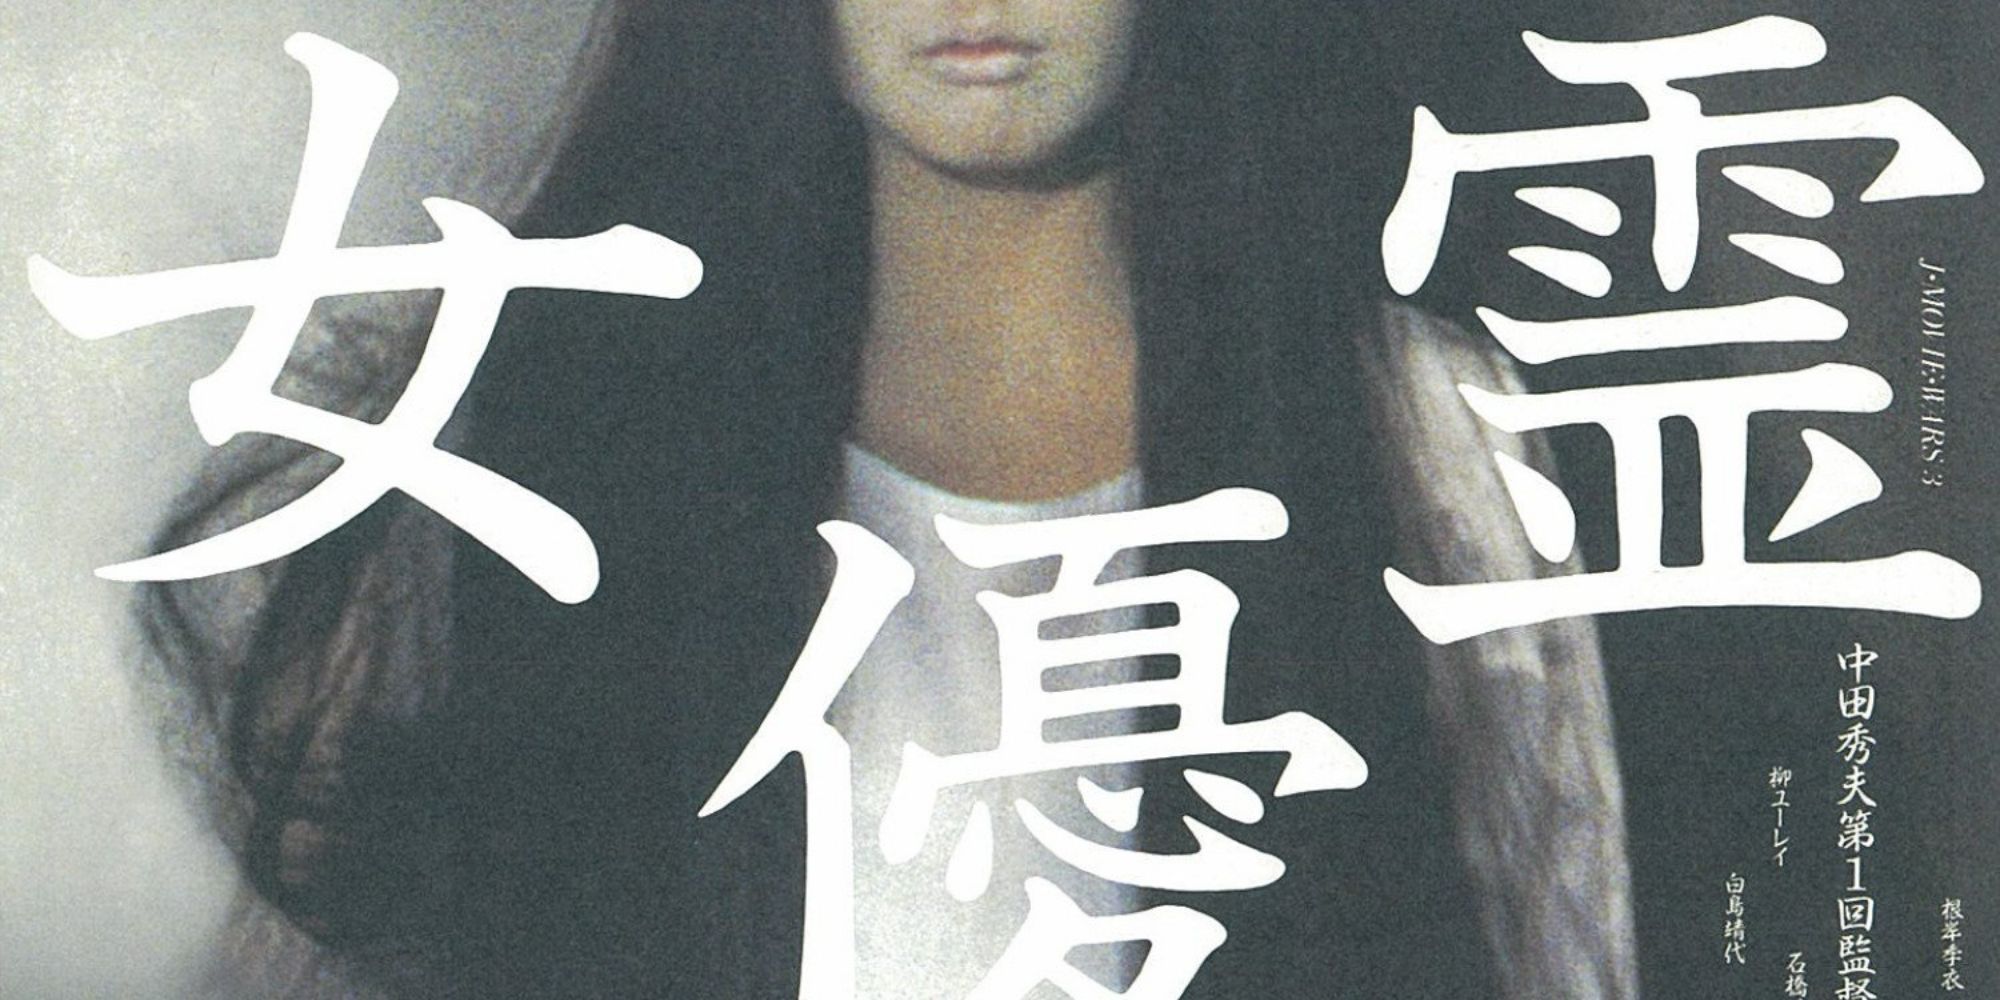 The title card of Don't Look Up, featuring a woman with long black hair